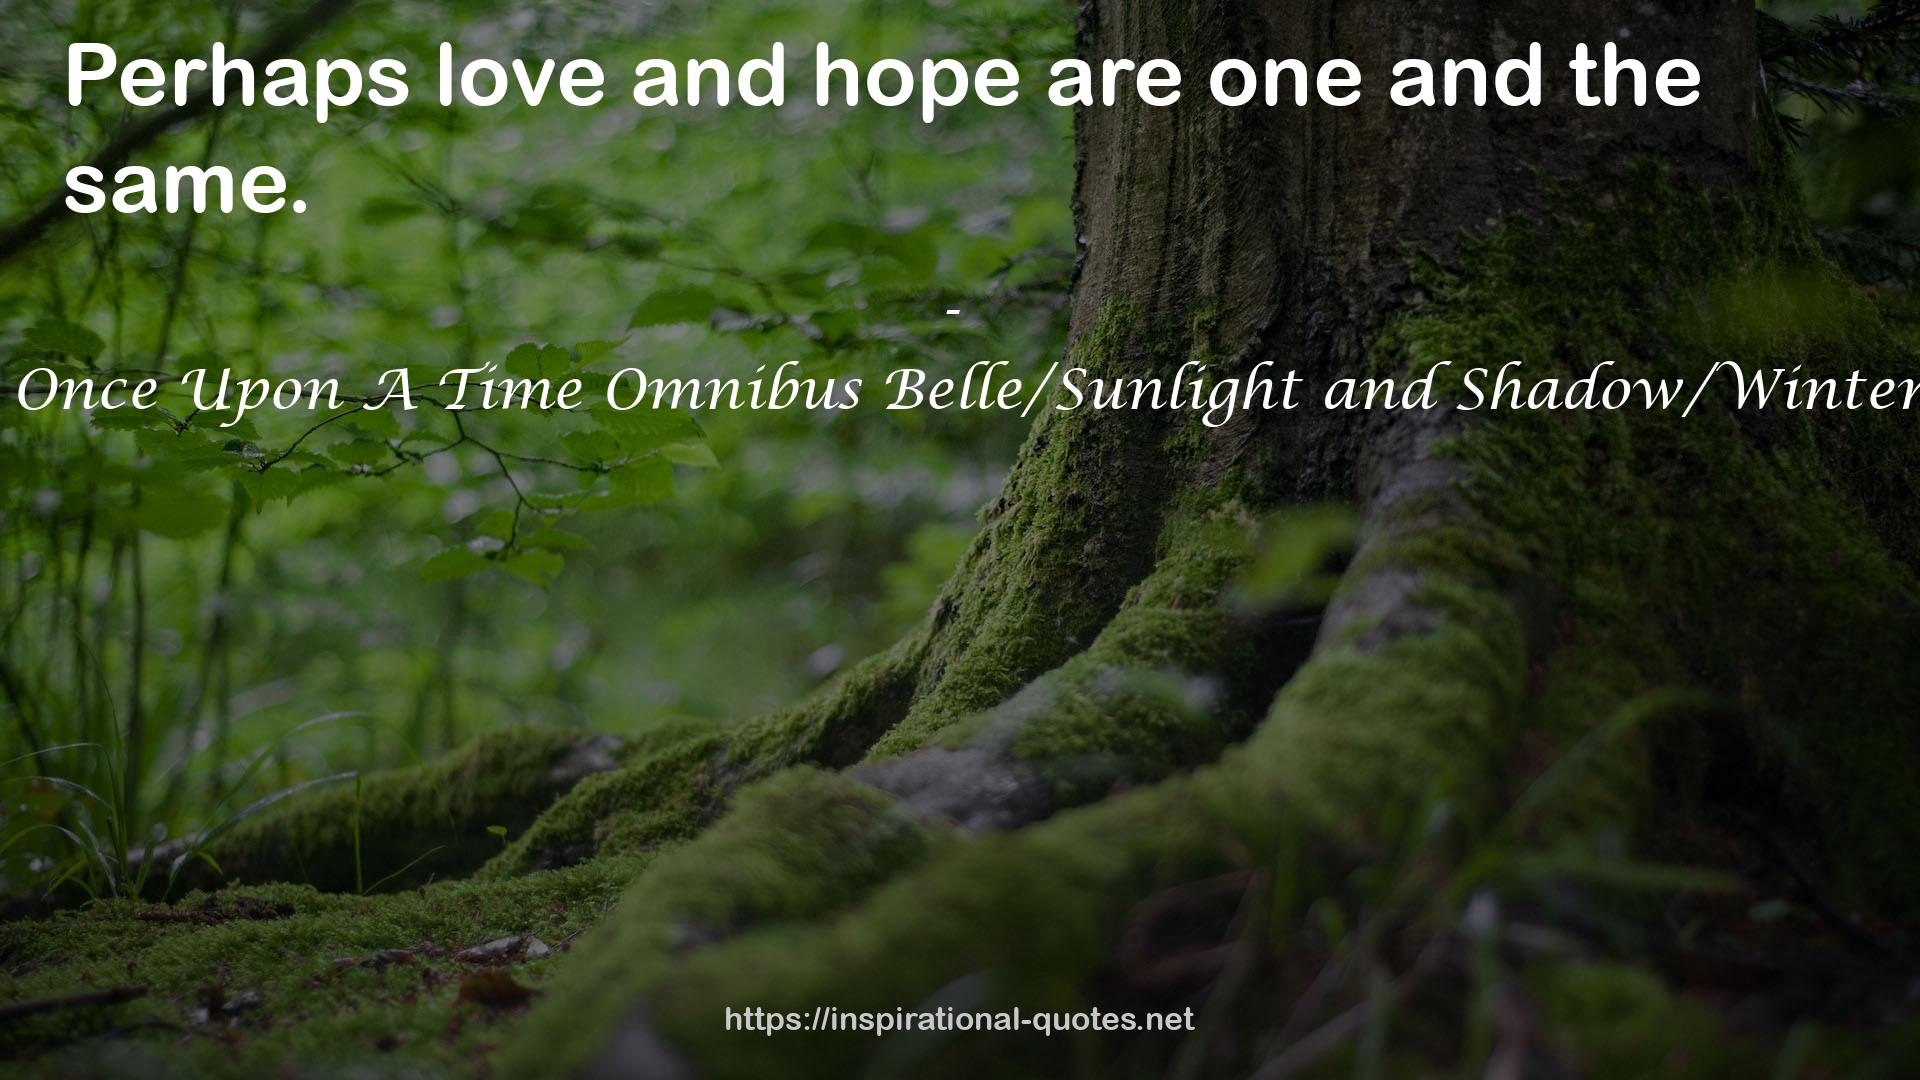 Kissed:  Once Upon A Time Omnibus Belle/Sunlight and Shadow/Winter's Child QUOTES